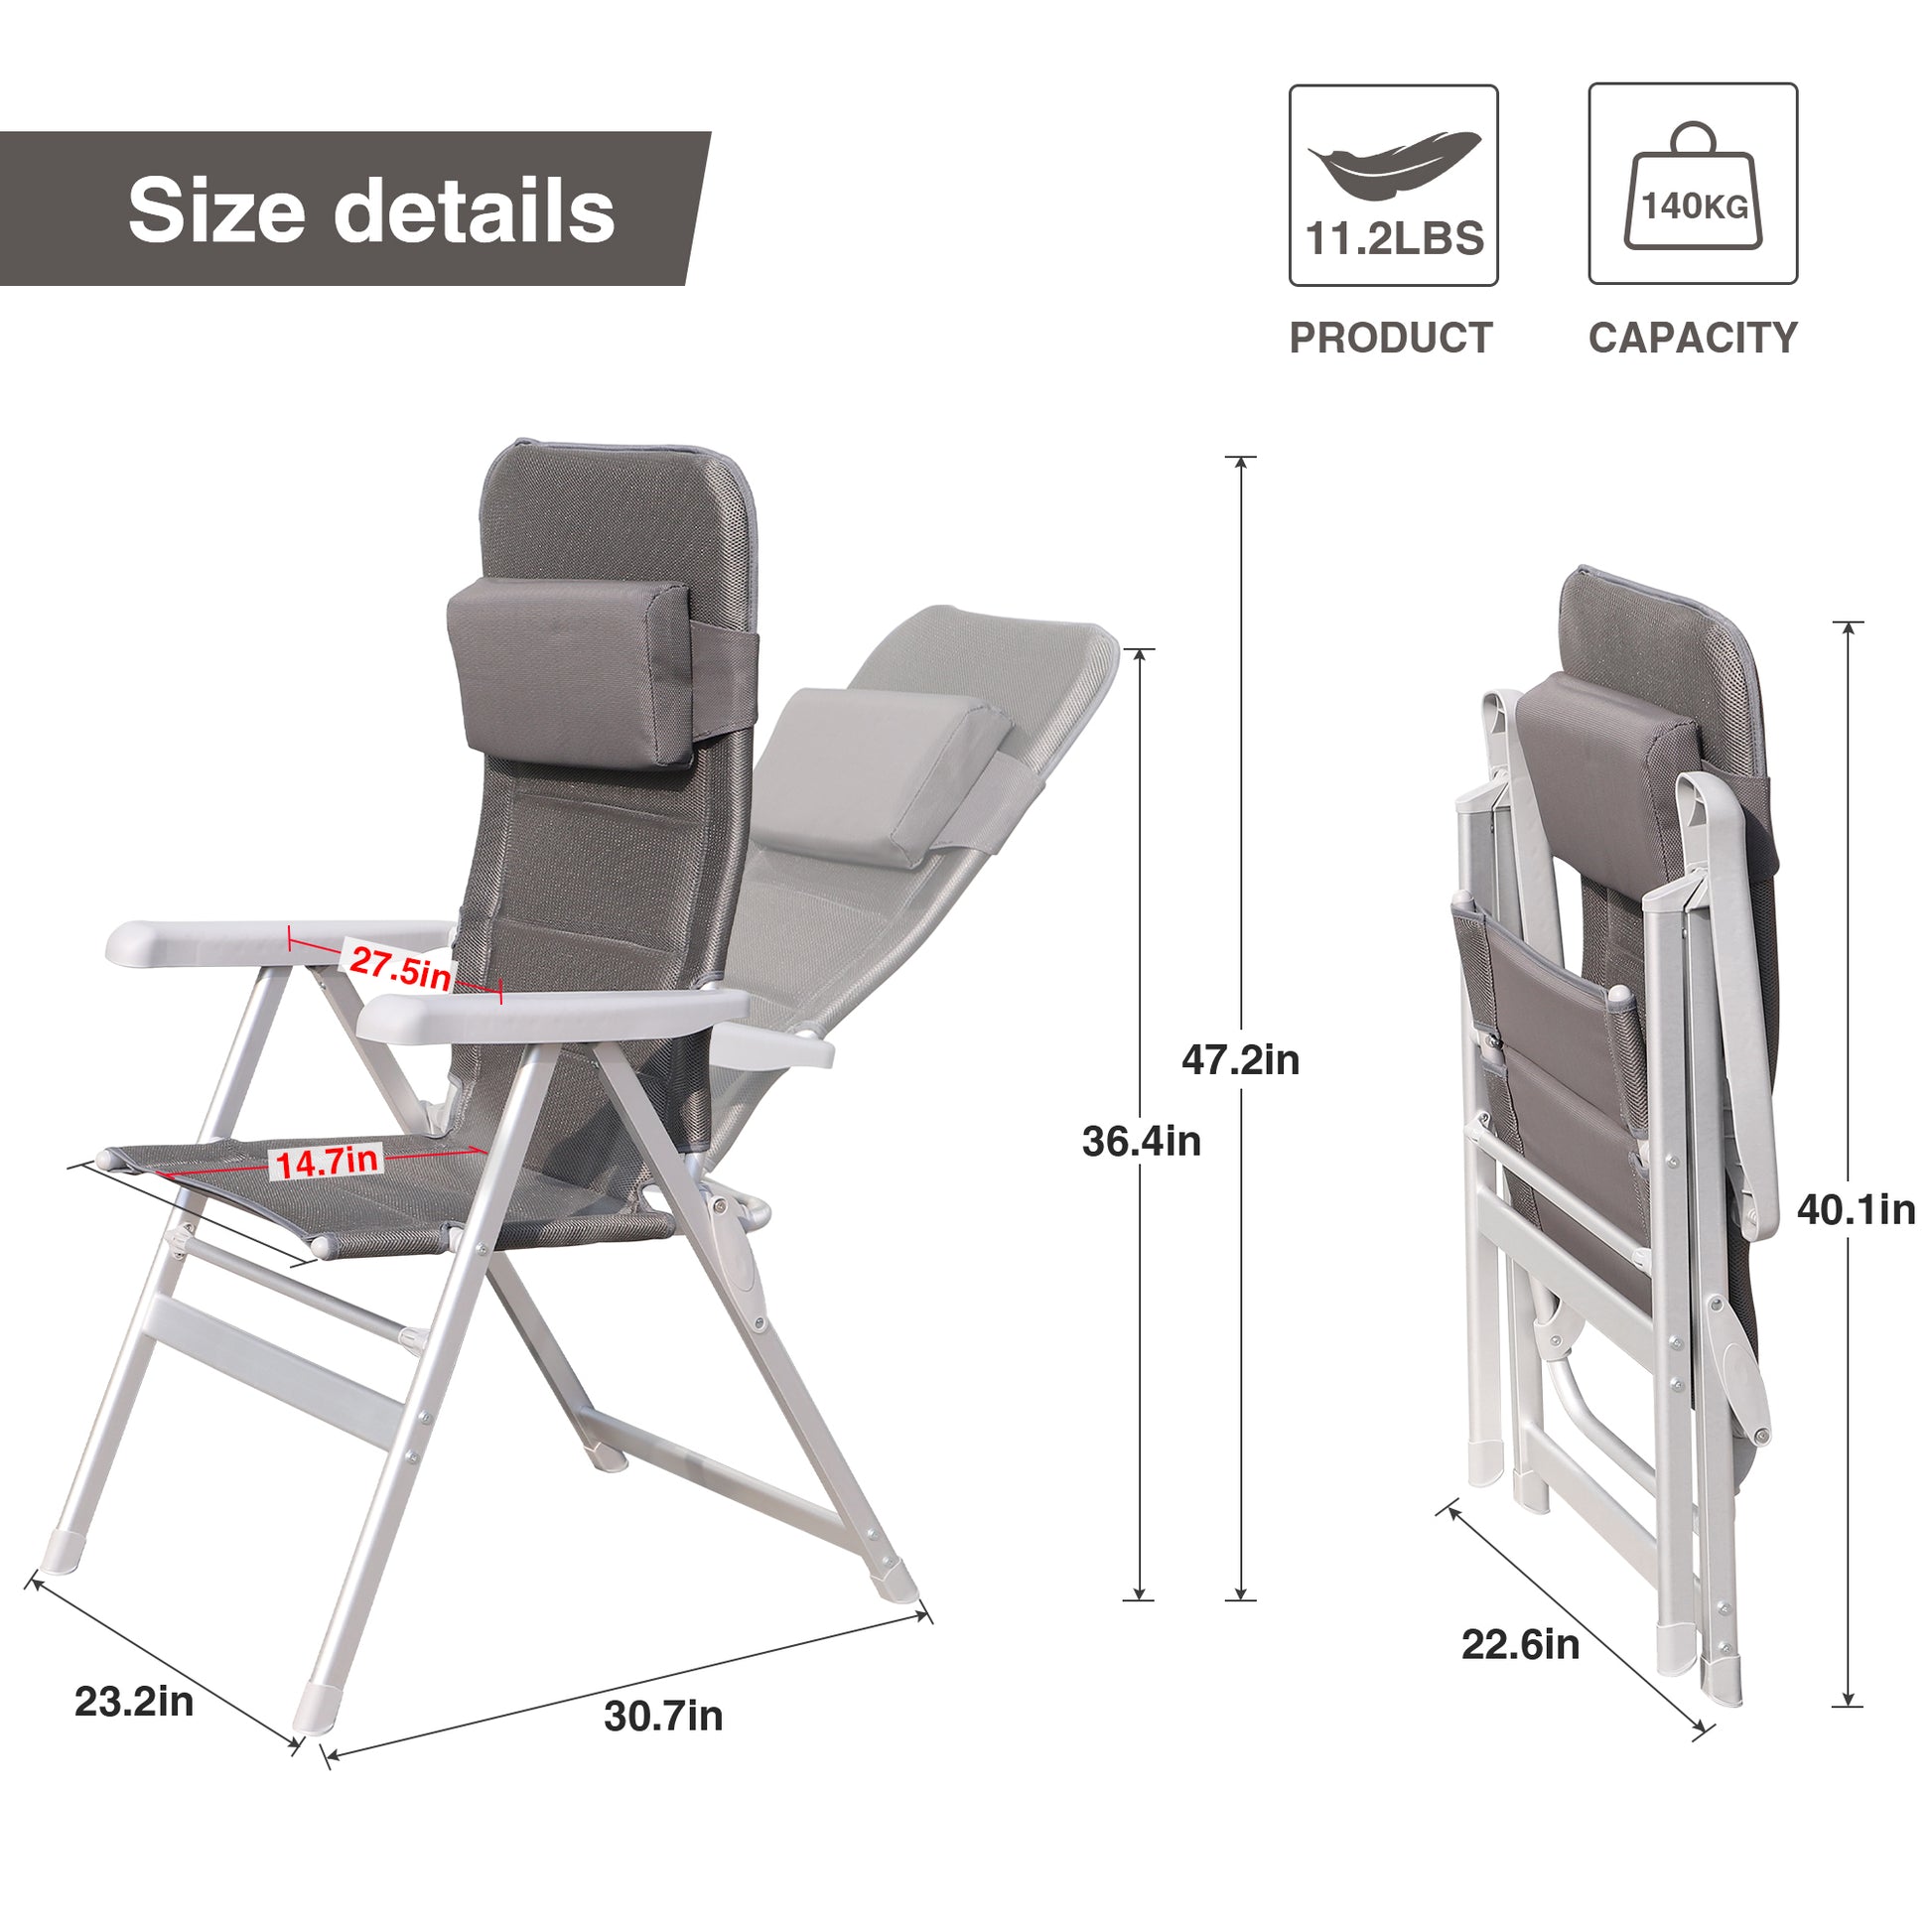 Aluminum Alloy Lounge Chair Adjustable Recliner w